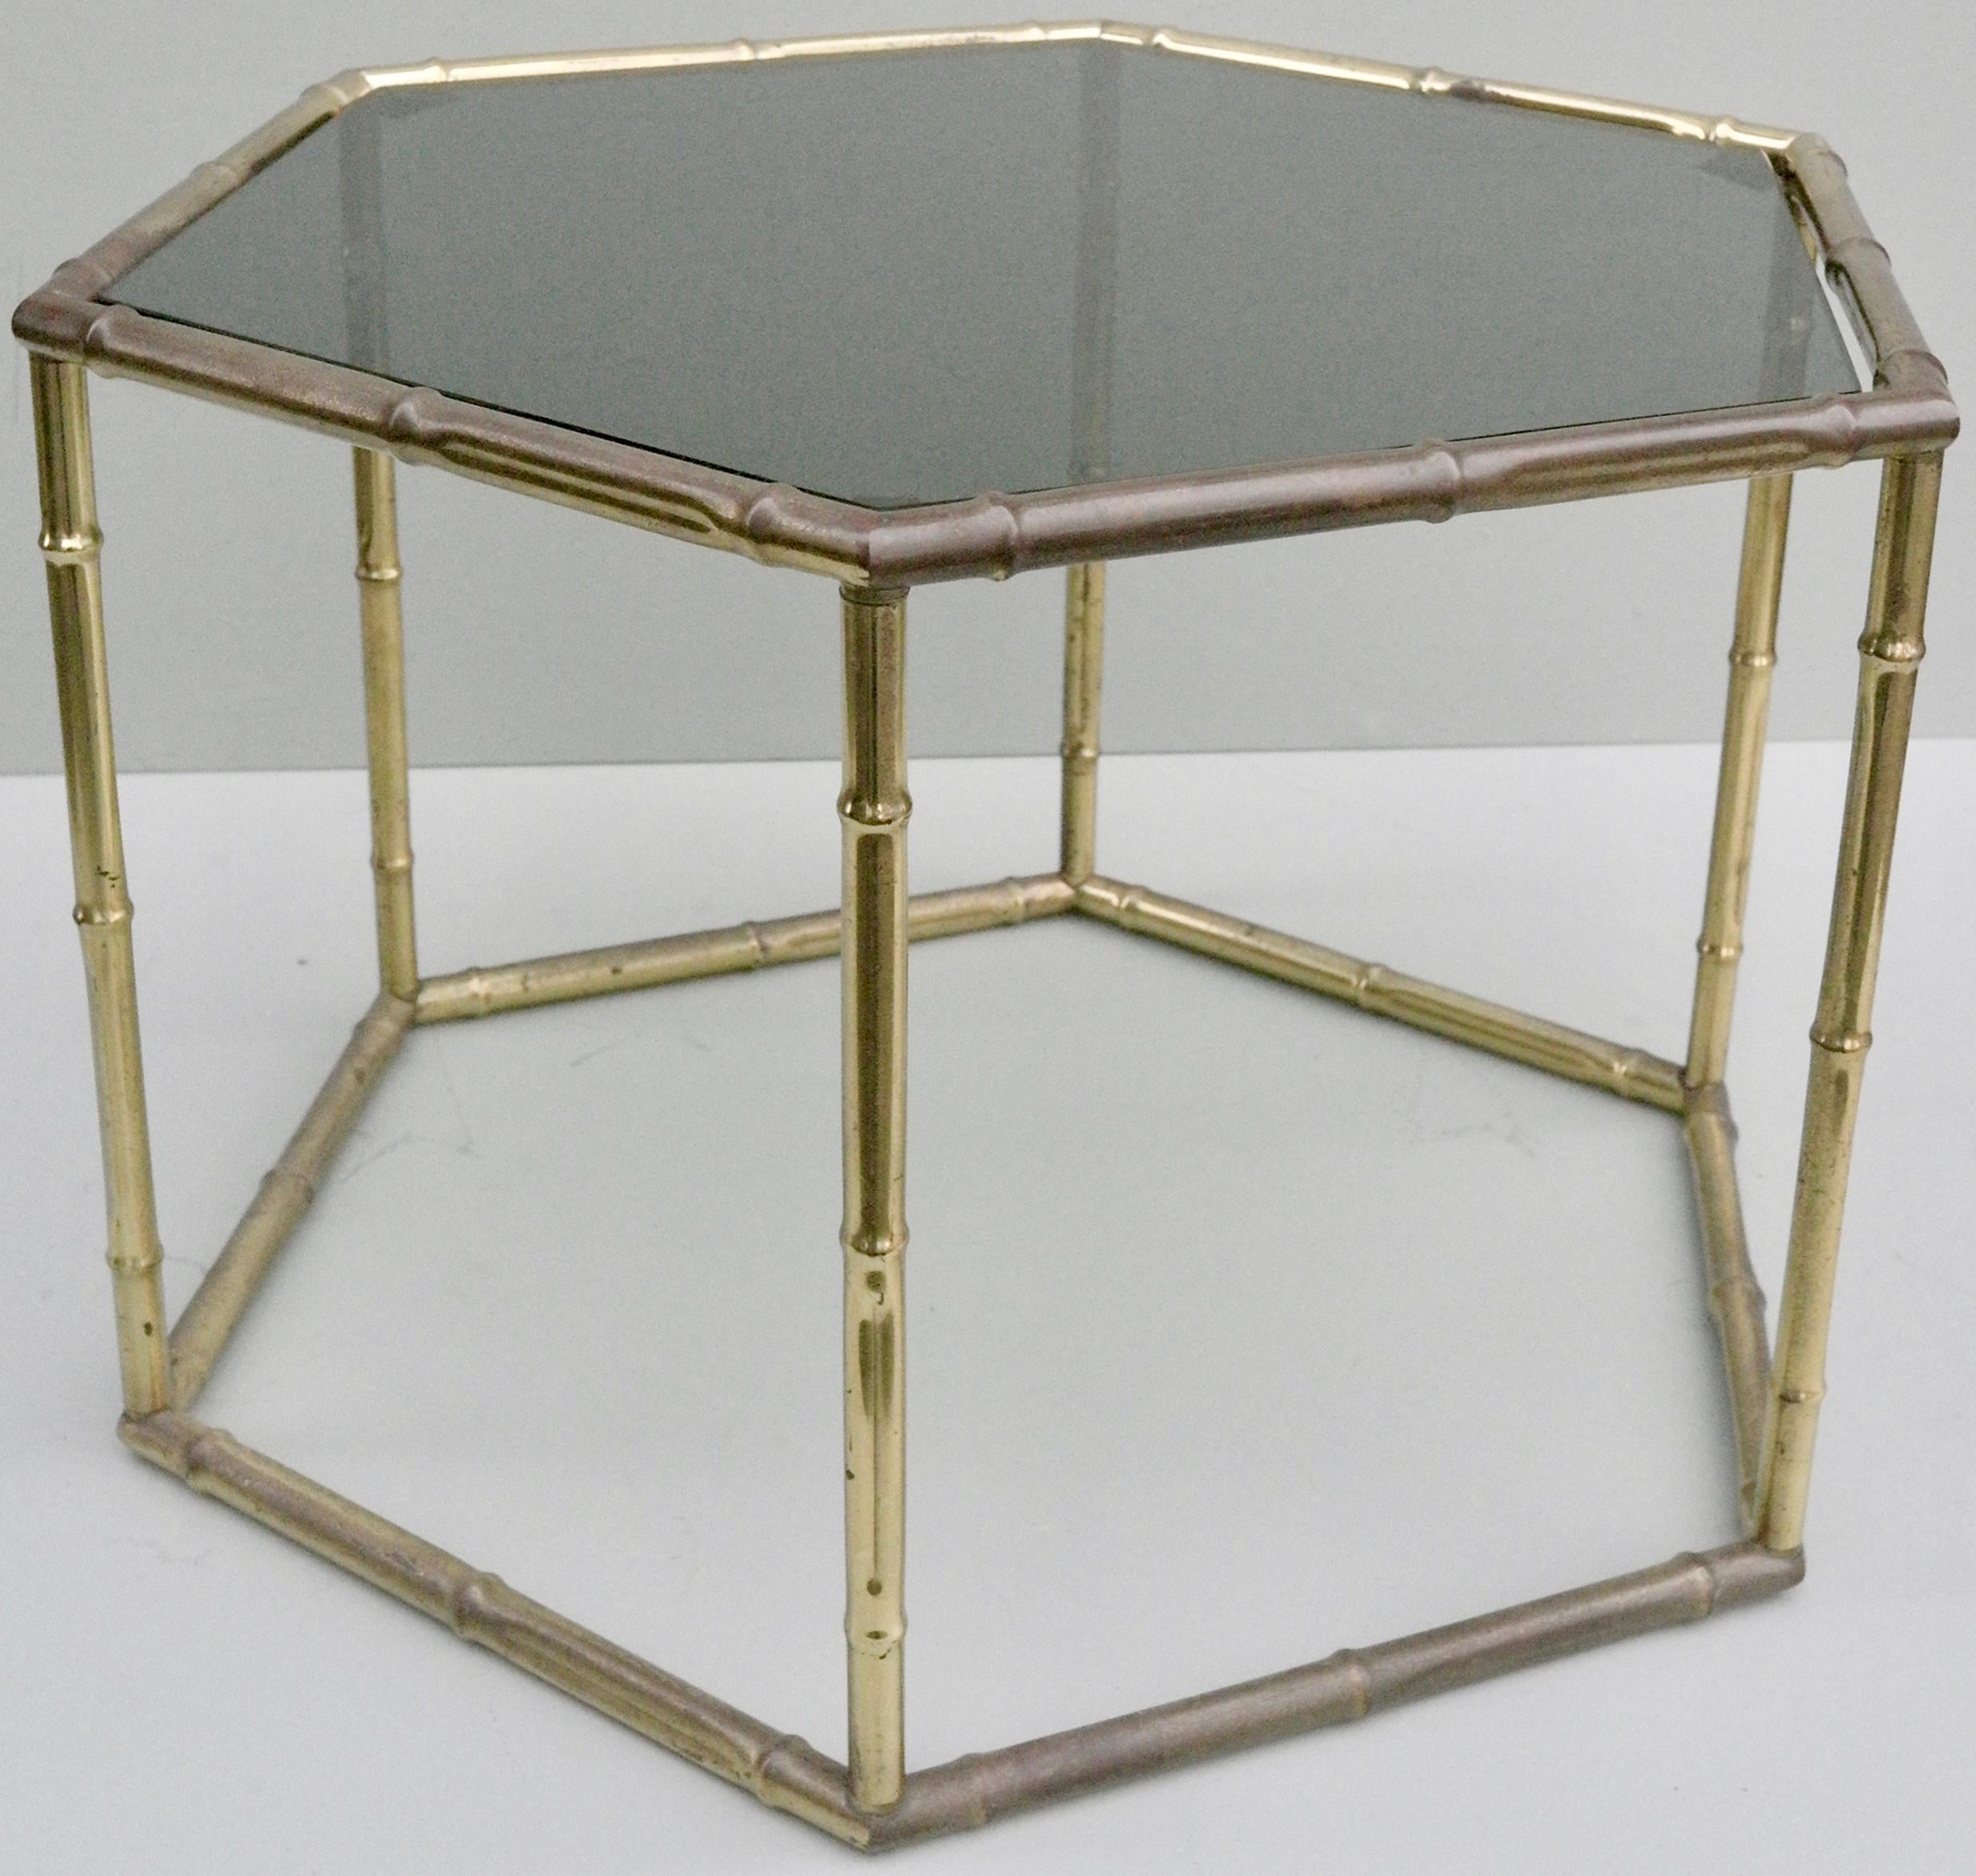 French symmetrical gold metal bamboo side table with dark glass top.